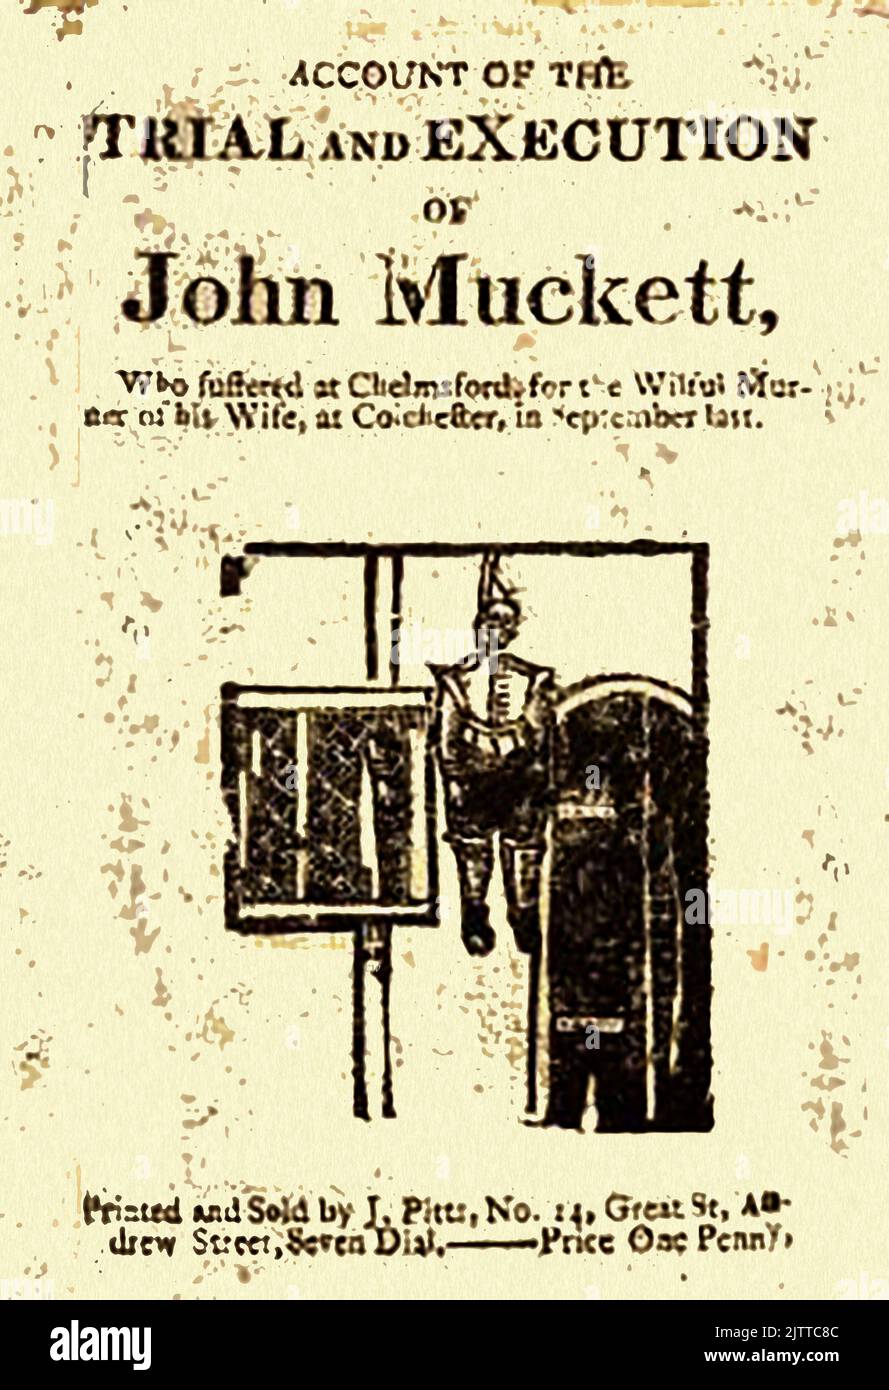 An historic image of a penny pamphlet (chapbook) recording the trial and execution of soldier John  Muckett who murdered his wife in Colchester, England where he was quartered whilst serving in the first battalion of the 4th Regiment of Foot. Chief witnesses were Thomas King and his wife who lodged in the same room who said he hit his wife in a domestic argument over his food. During the night she was found dead in bed. At his execution he admitted responsibility but swore he had not intended to cause his wife a fatal injury. He was executed at Chelmsford on on New Years Day 1841. Stock Photo